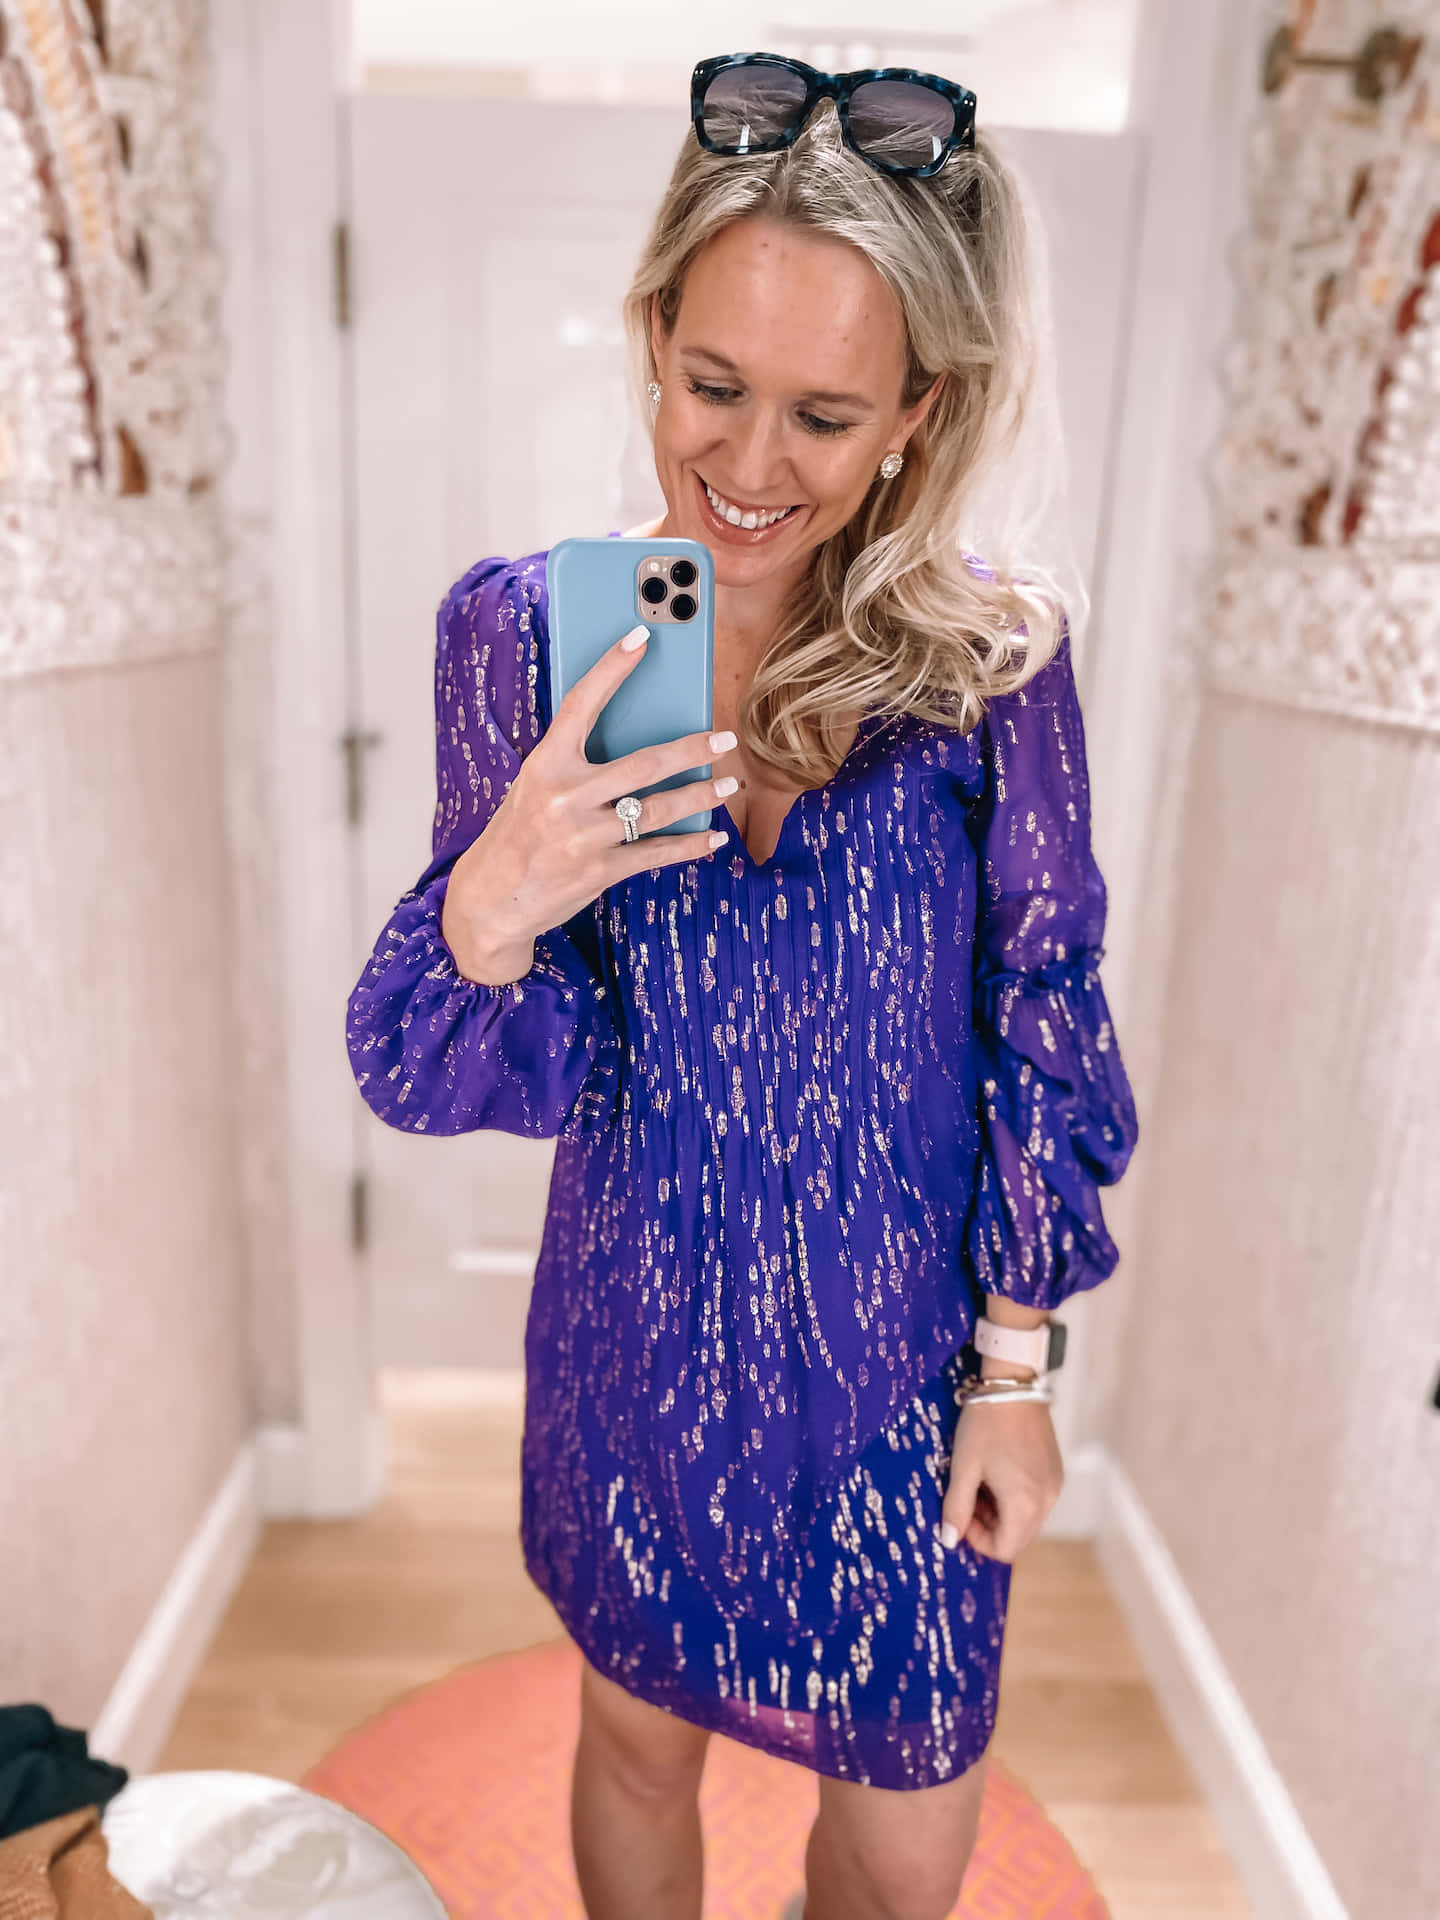 Experience the Palm Beach Posh Style with Lilly Pulitzer